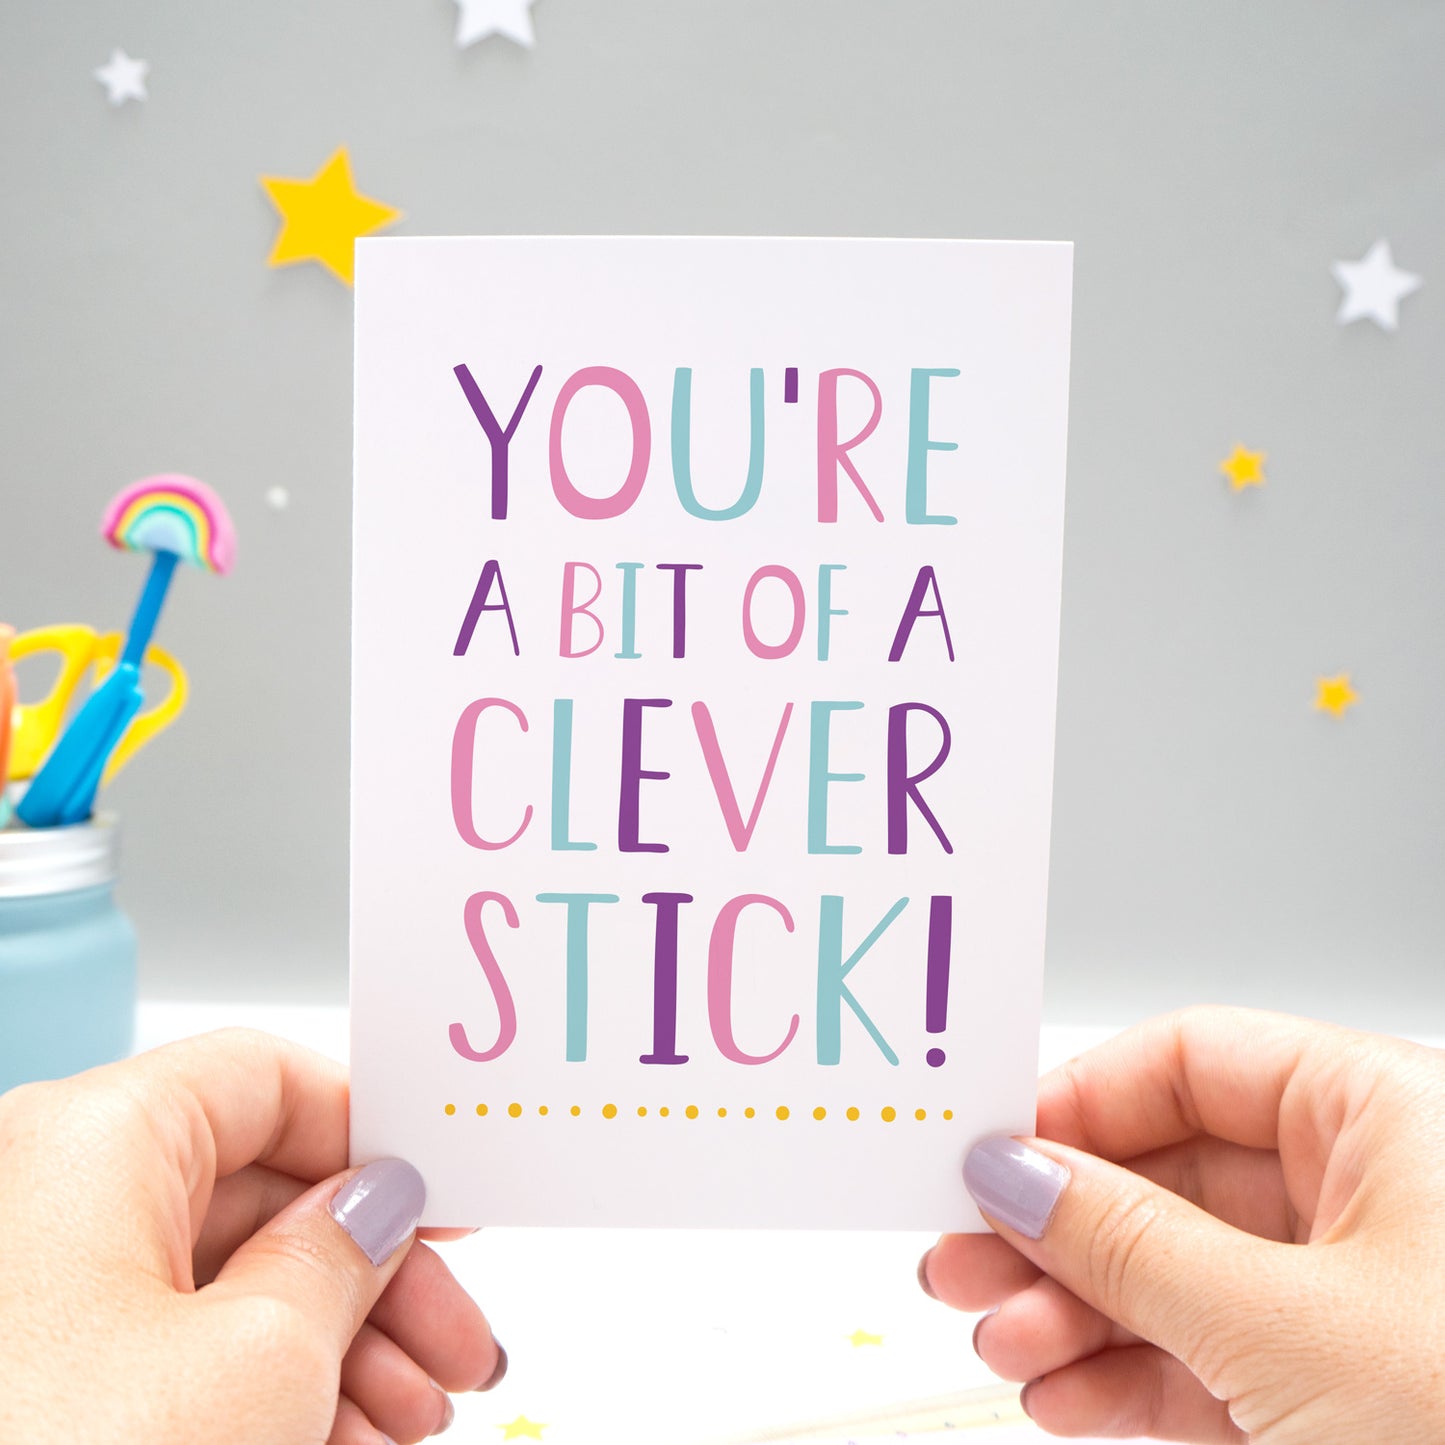 You're a bit of a clever stick card designed and made by Joanne Hawker in her Somerset Studio is being held against a grey background with yellow and white stars. The typography is in varying tones of blue, pink, purple and a pop of yellow!